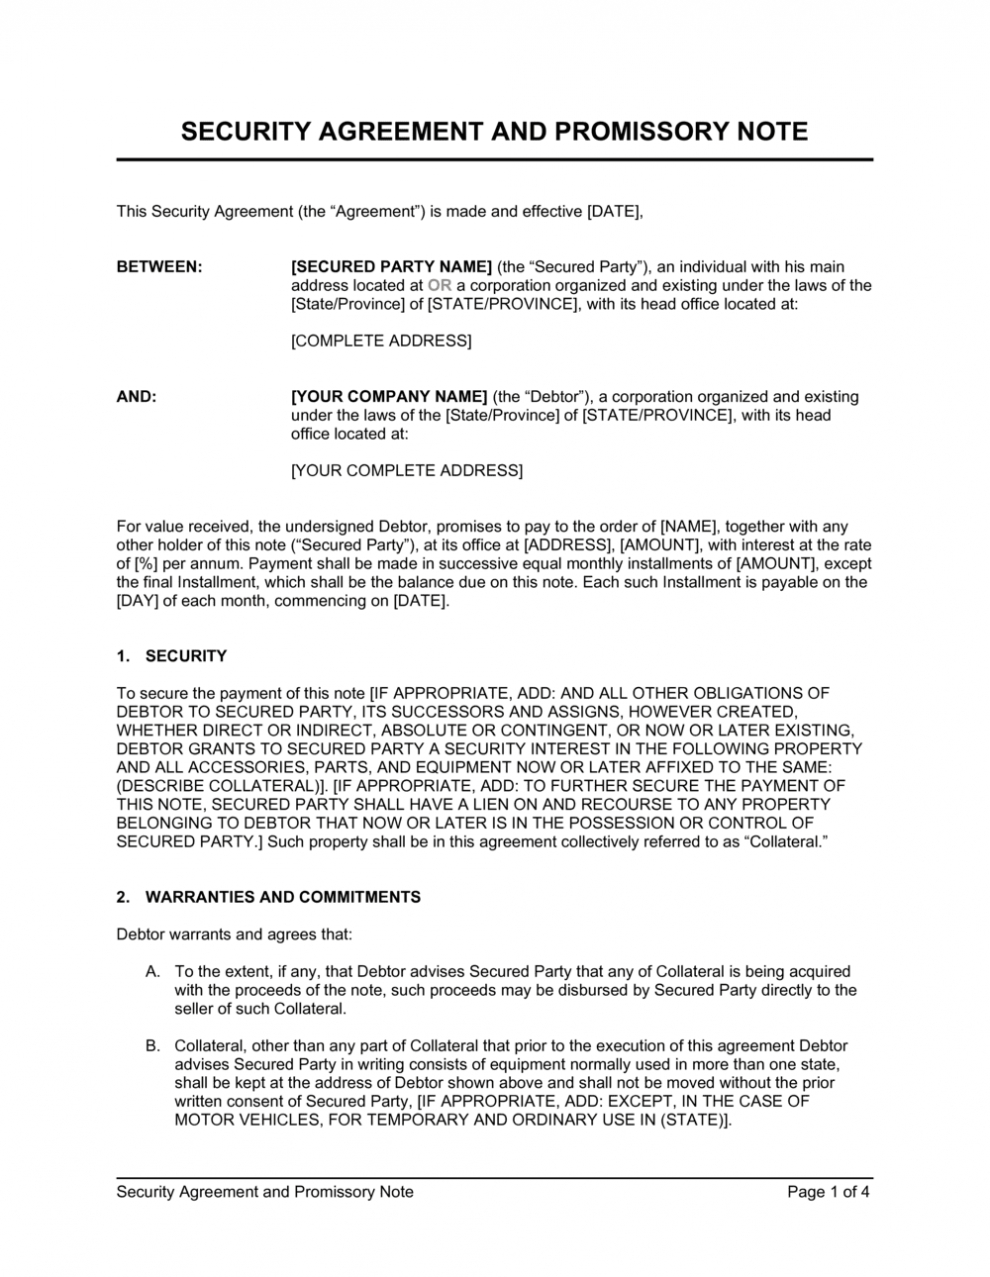 Security Agreement And Promissory Note Template | By regarding Collateral Warranty Agreement Template